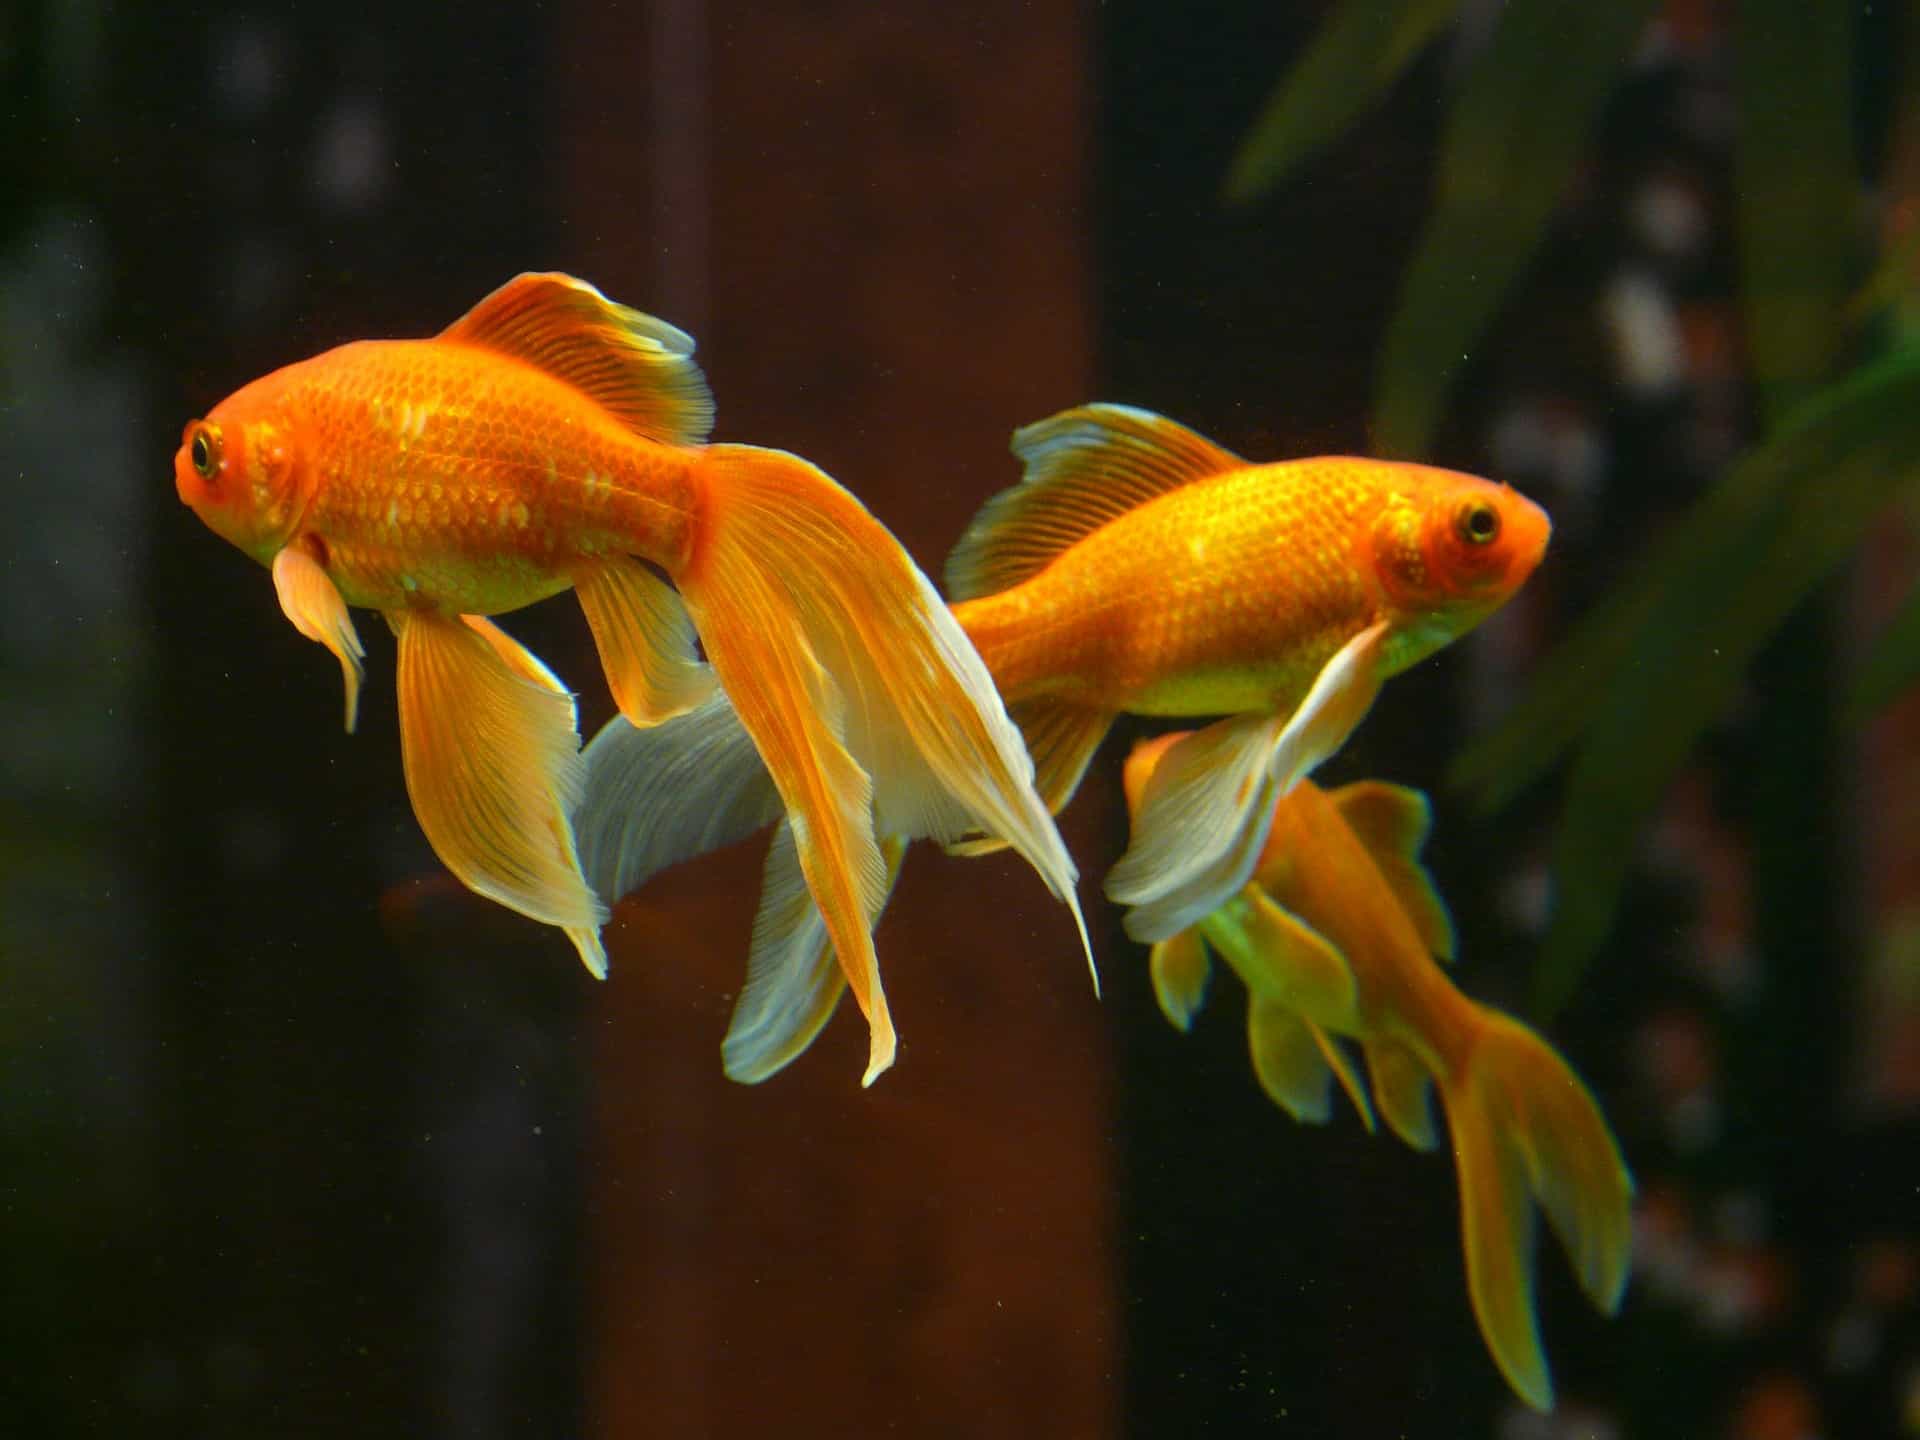 Top 15 Goldfish Facts - Types, Diet, Lifespan & More 